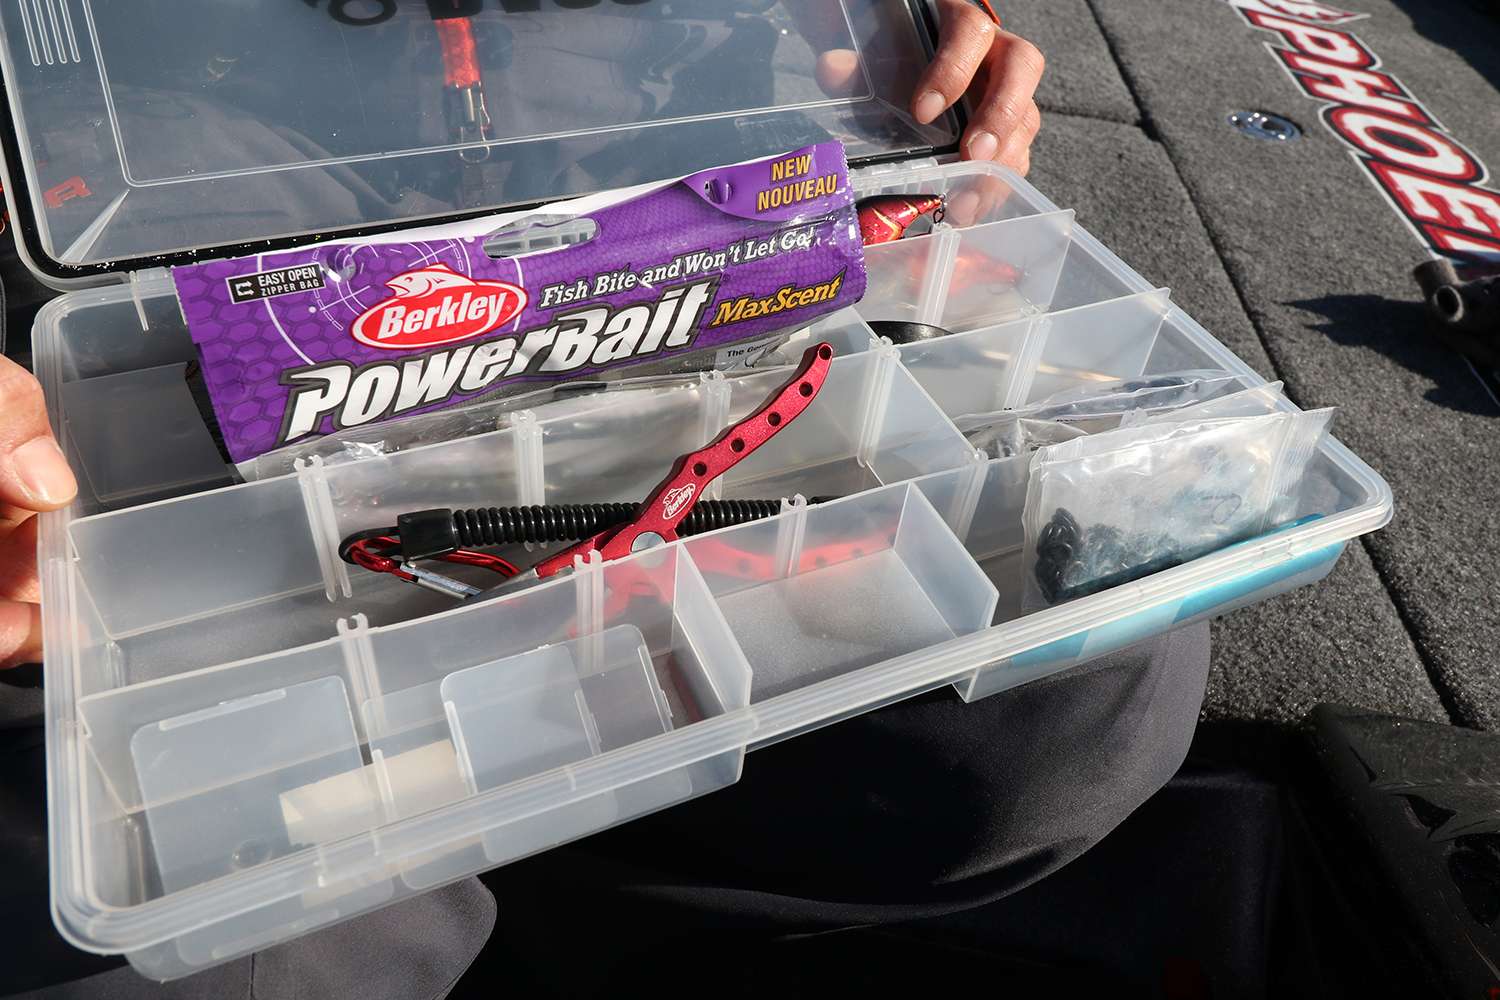 That's a good start, he said. Leave a little bit of room in the box to add baits to your collection as you master each technique. But don't take on too much. One step at a time he said.